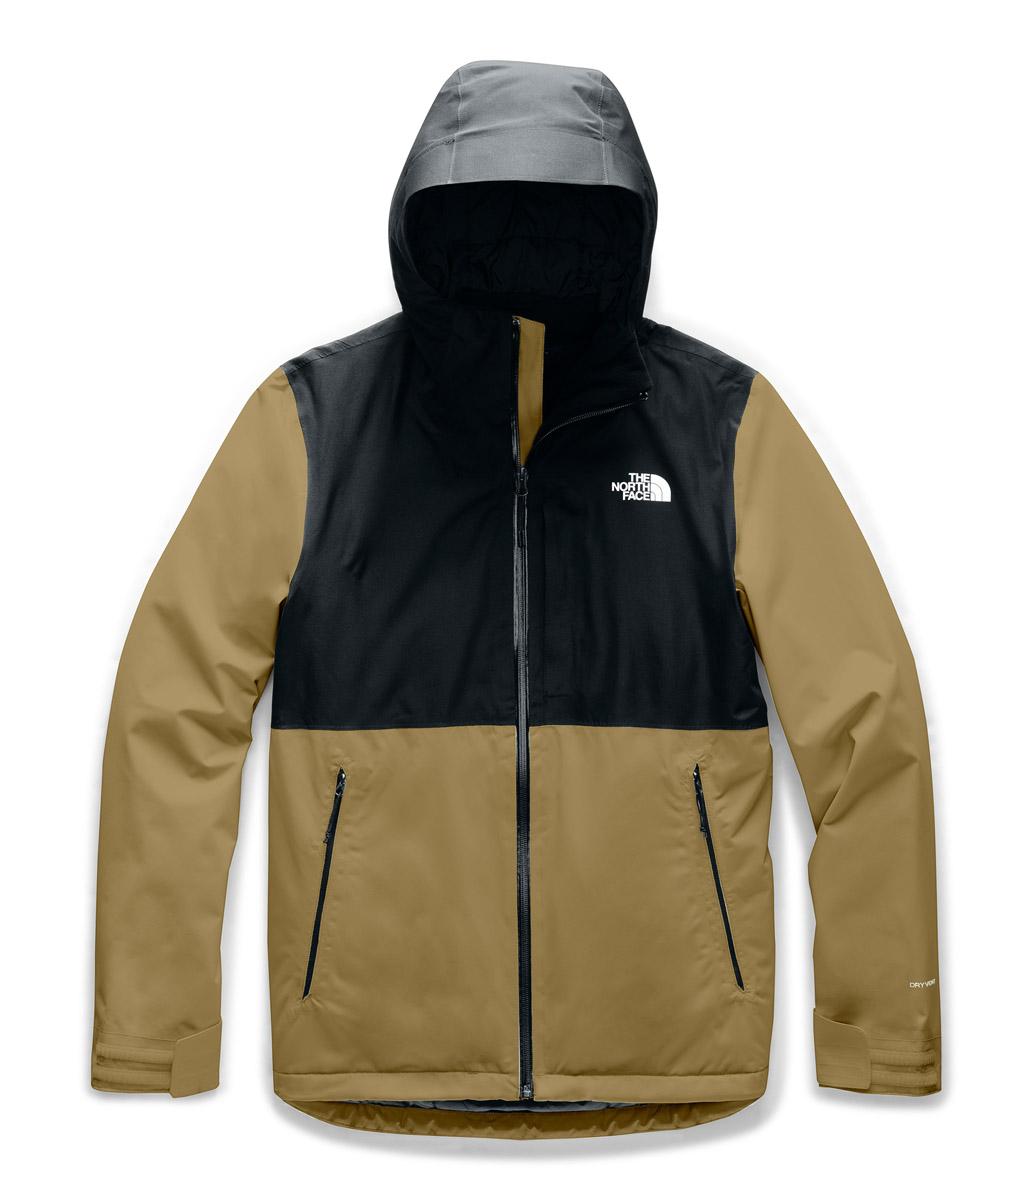 inlux insulated jacket